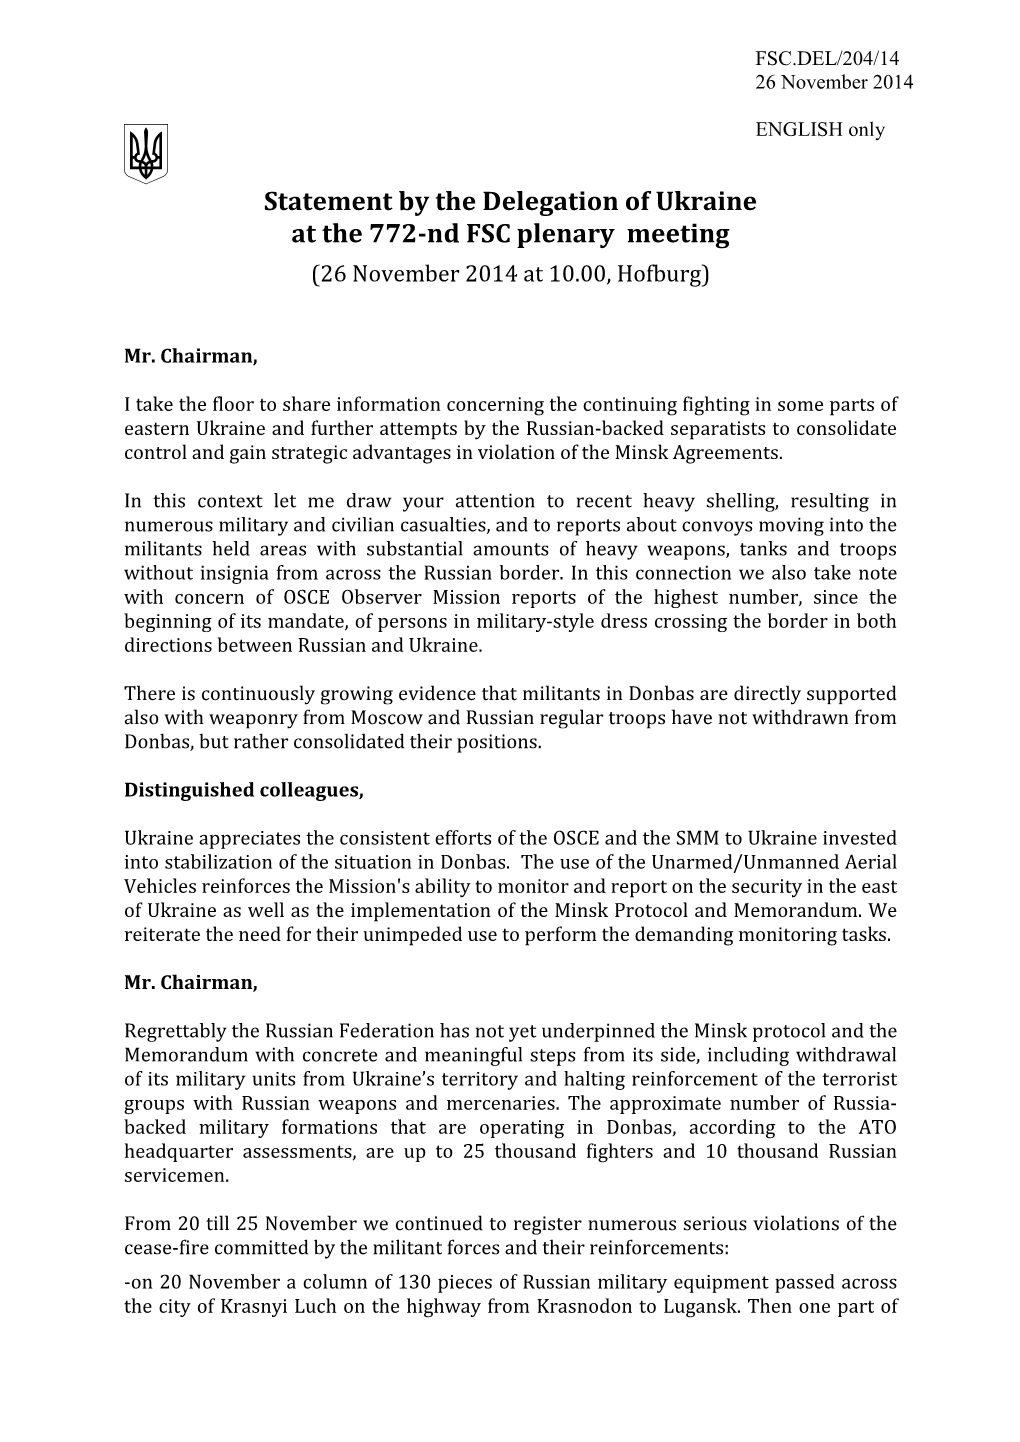 Statement by the Delegation of Ukraine at the 772-Nd FSC Plenary Meeting (26 November 2014 at 10.00, Hofburg)